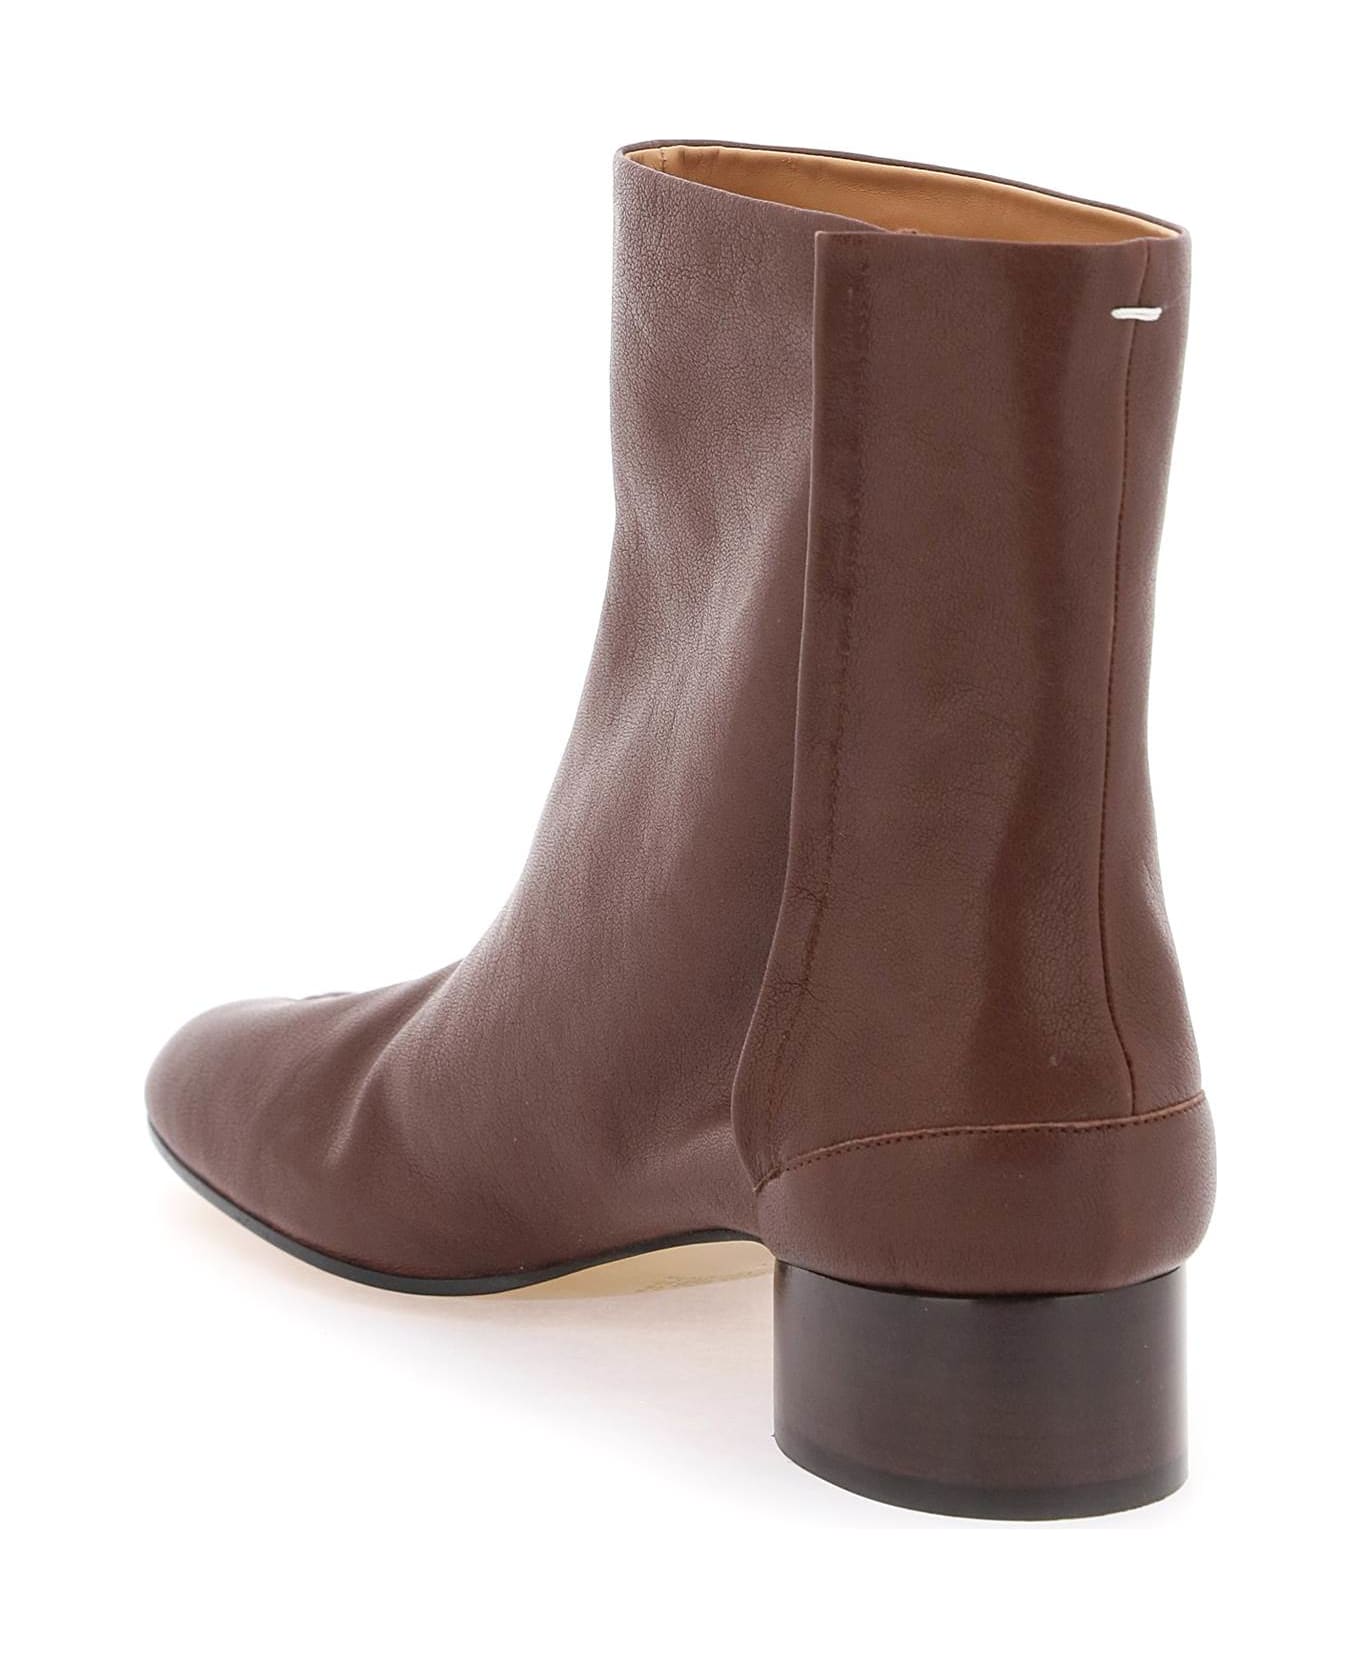 Maison Margiela Tabi Ankle Boots - MAJOR BROWN (Brown) ブーツ